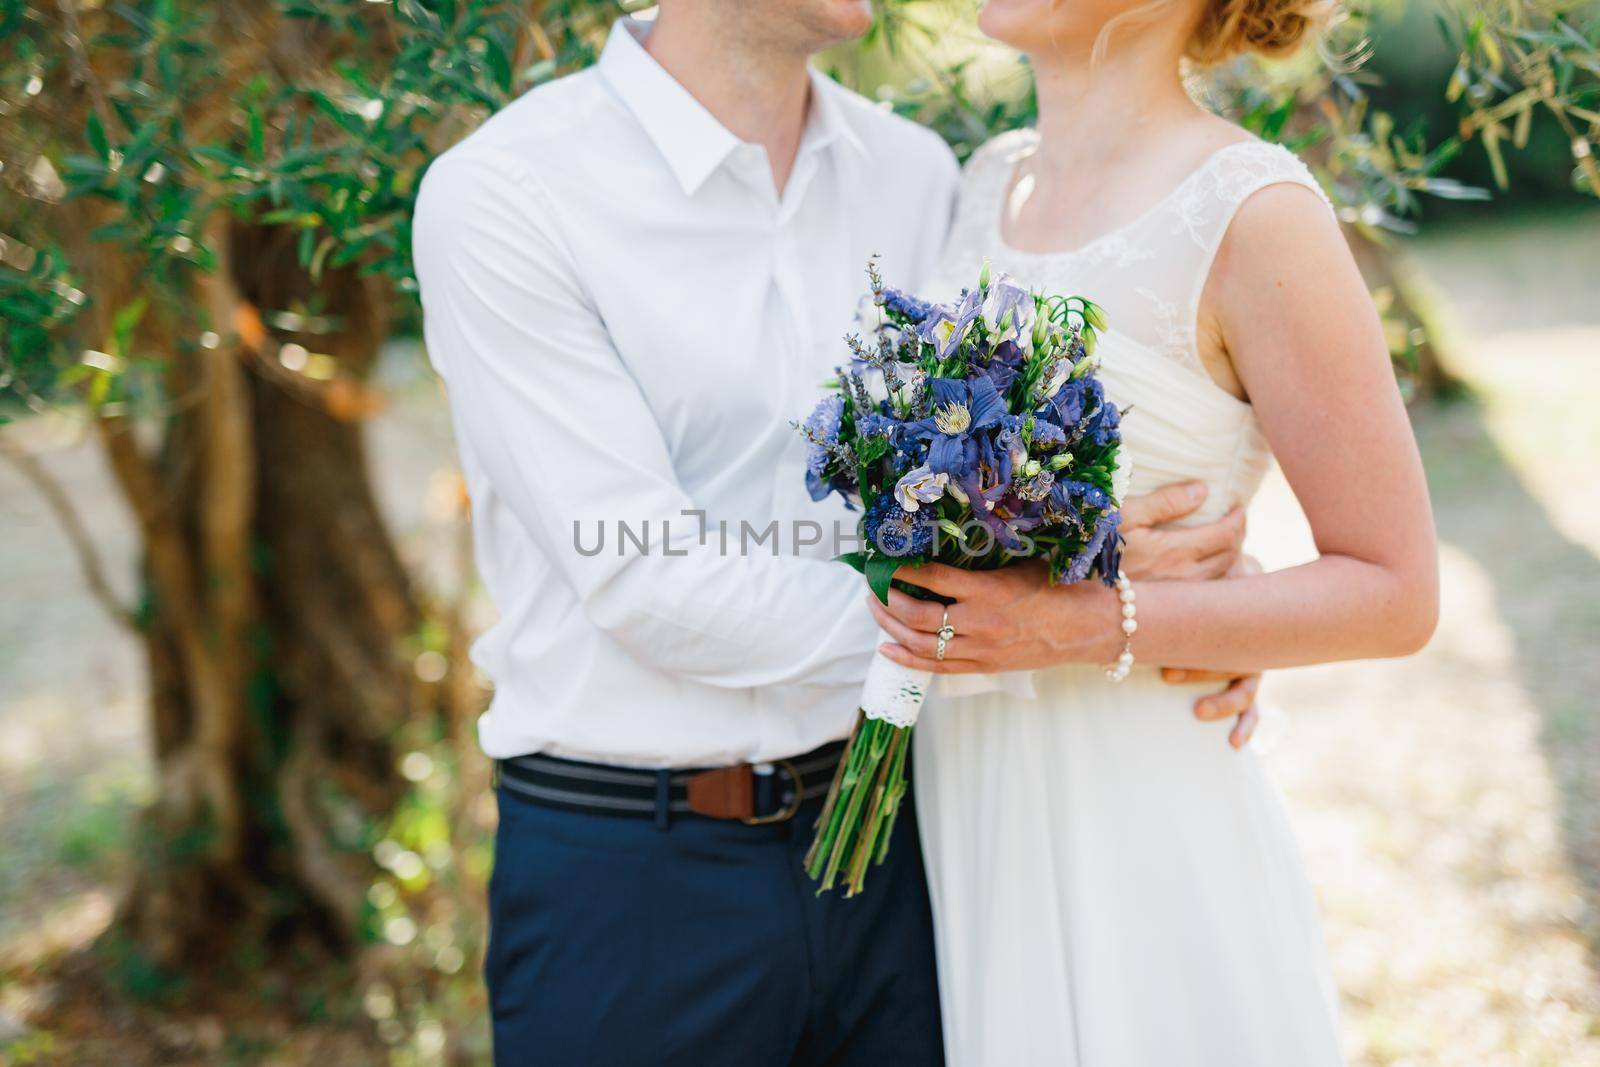 Bride with a bouquet of blue flowers and the groom embracing tenderly in the olive grove by Nadtochiy